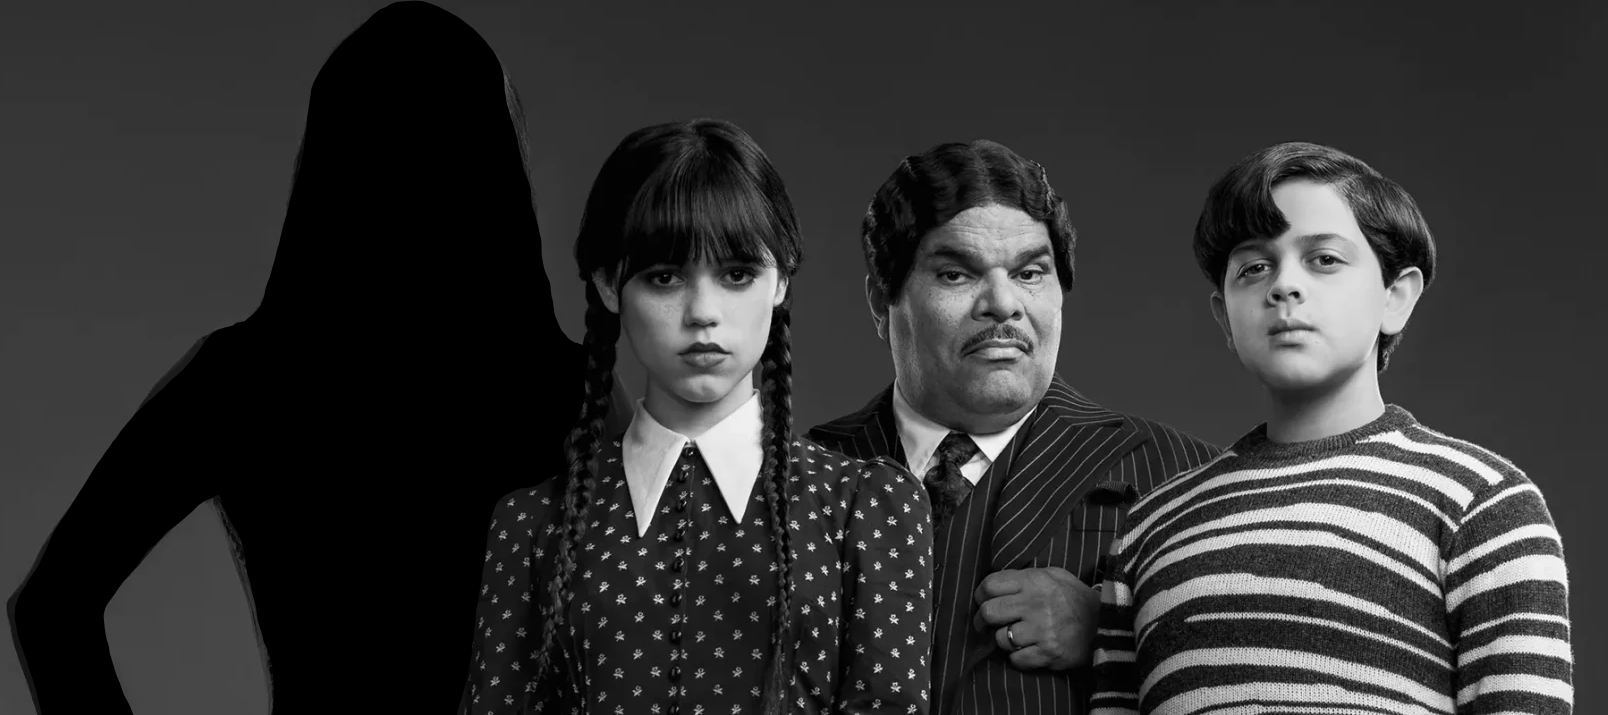 The new Addams Family has been revealed and there is one glaring mistake